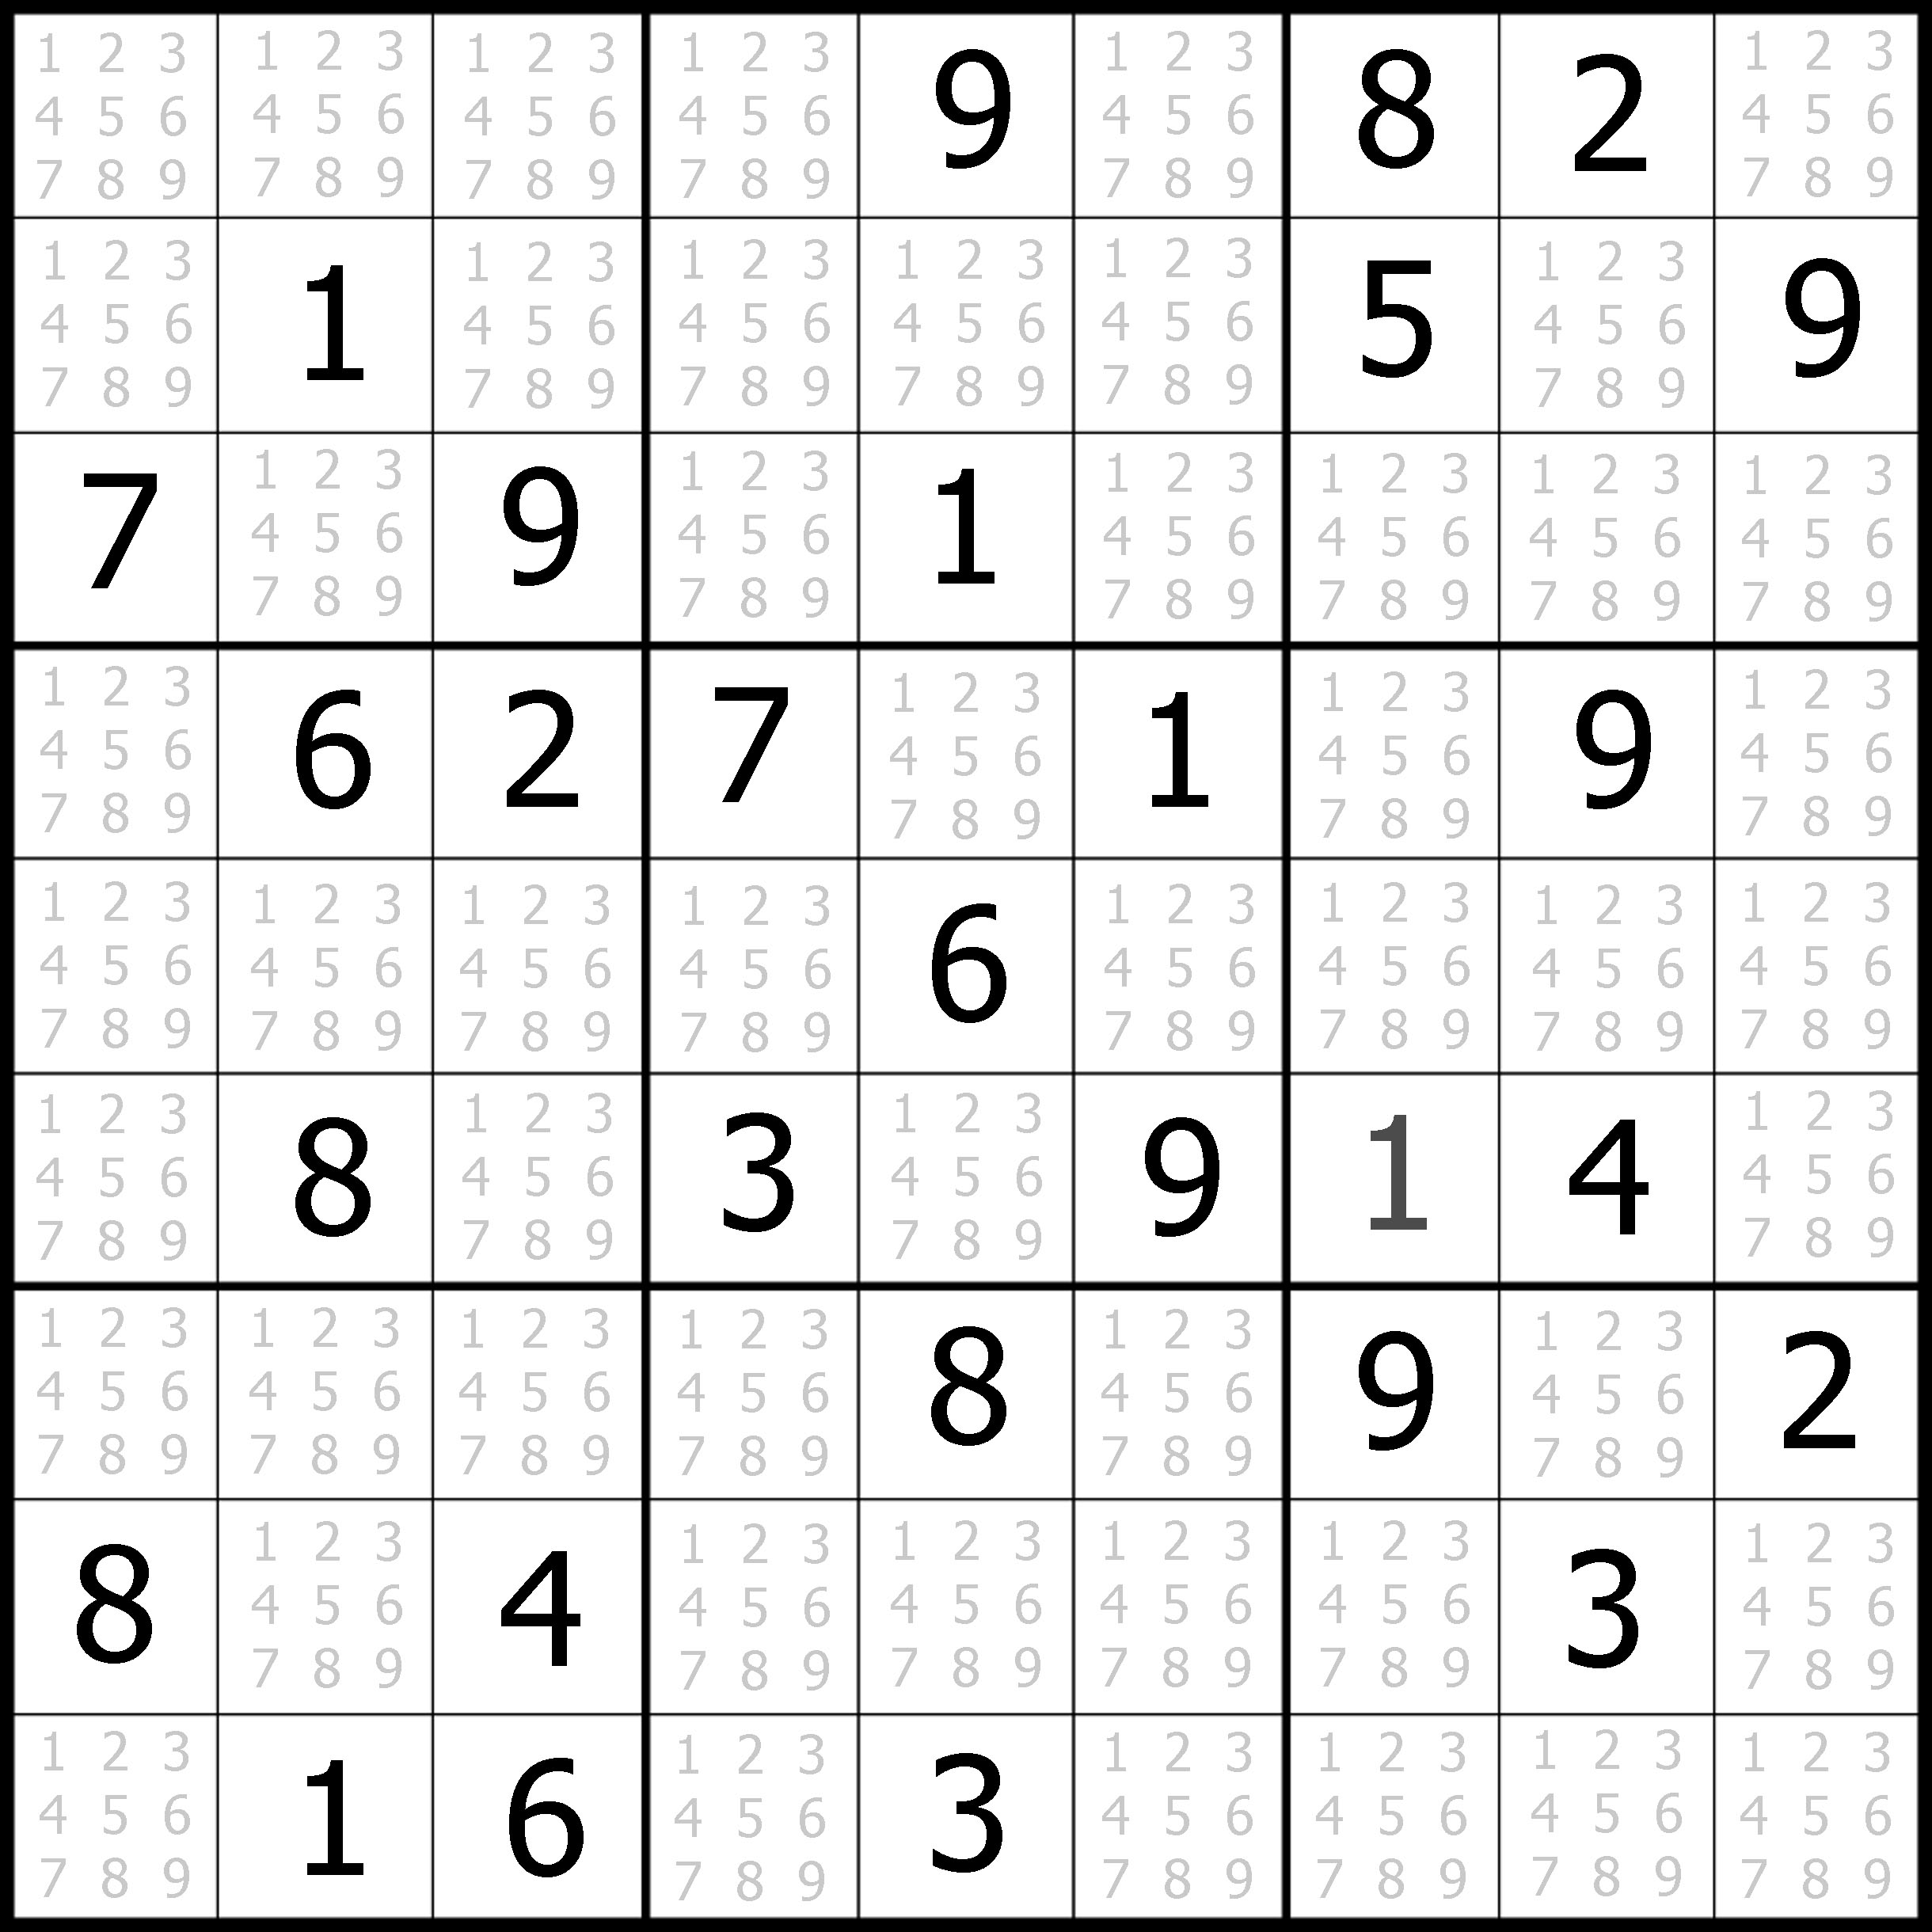 Sudoku Puzzler Free, printable, updated sudoku puzzles with a helpful